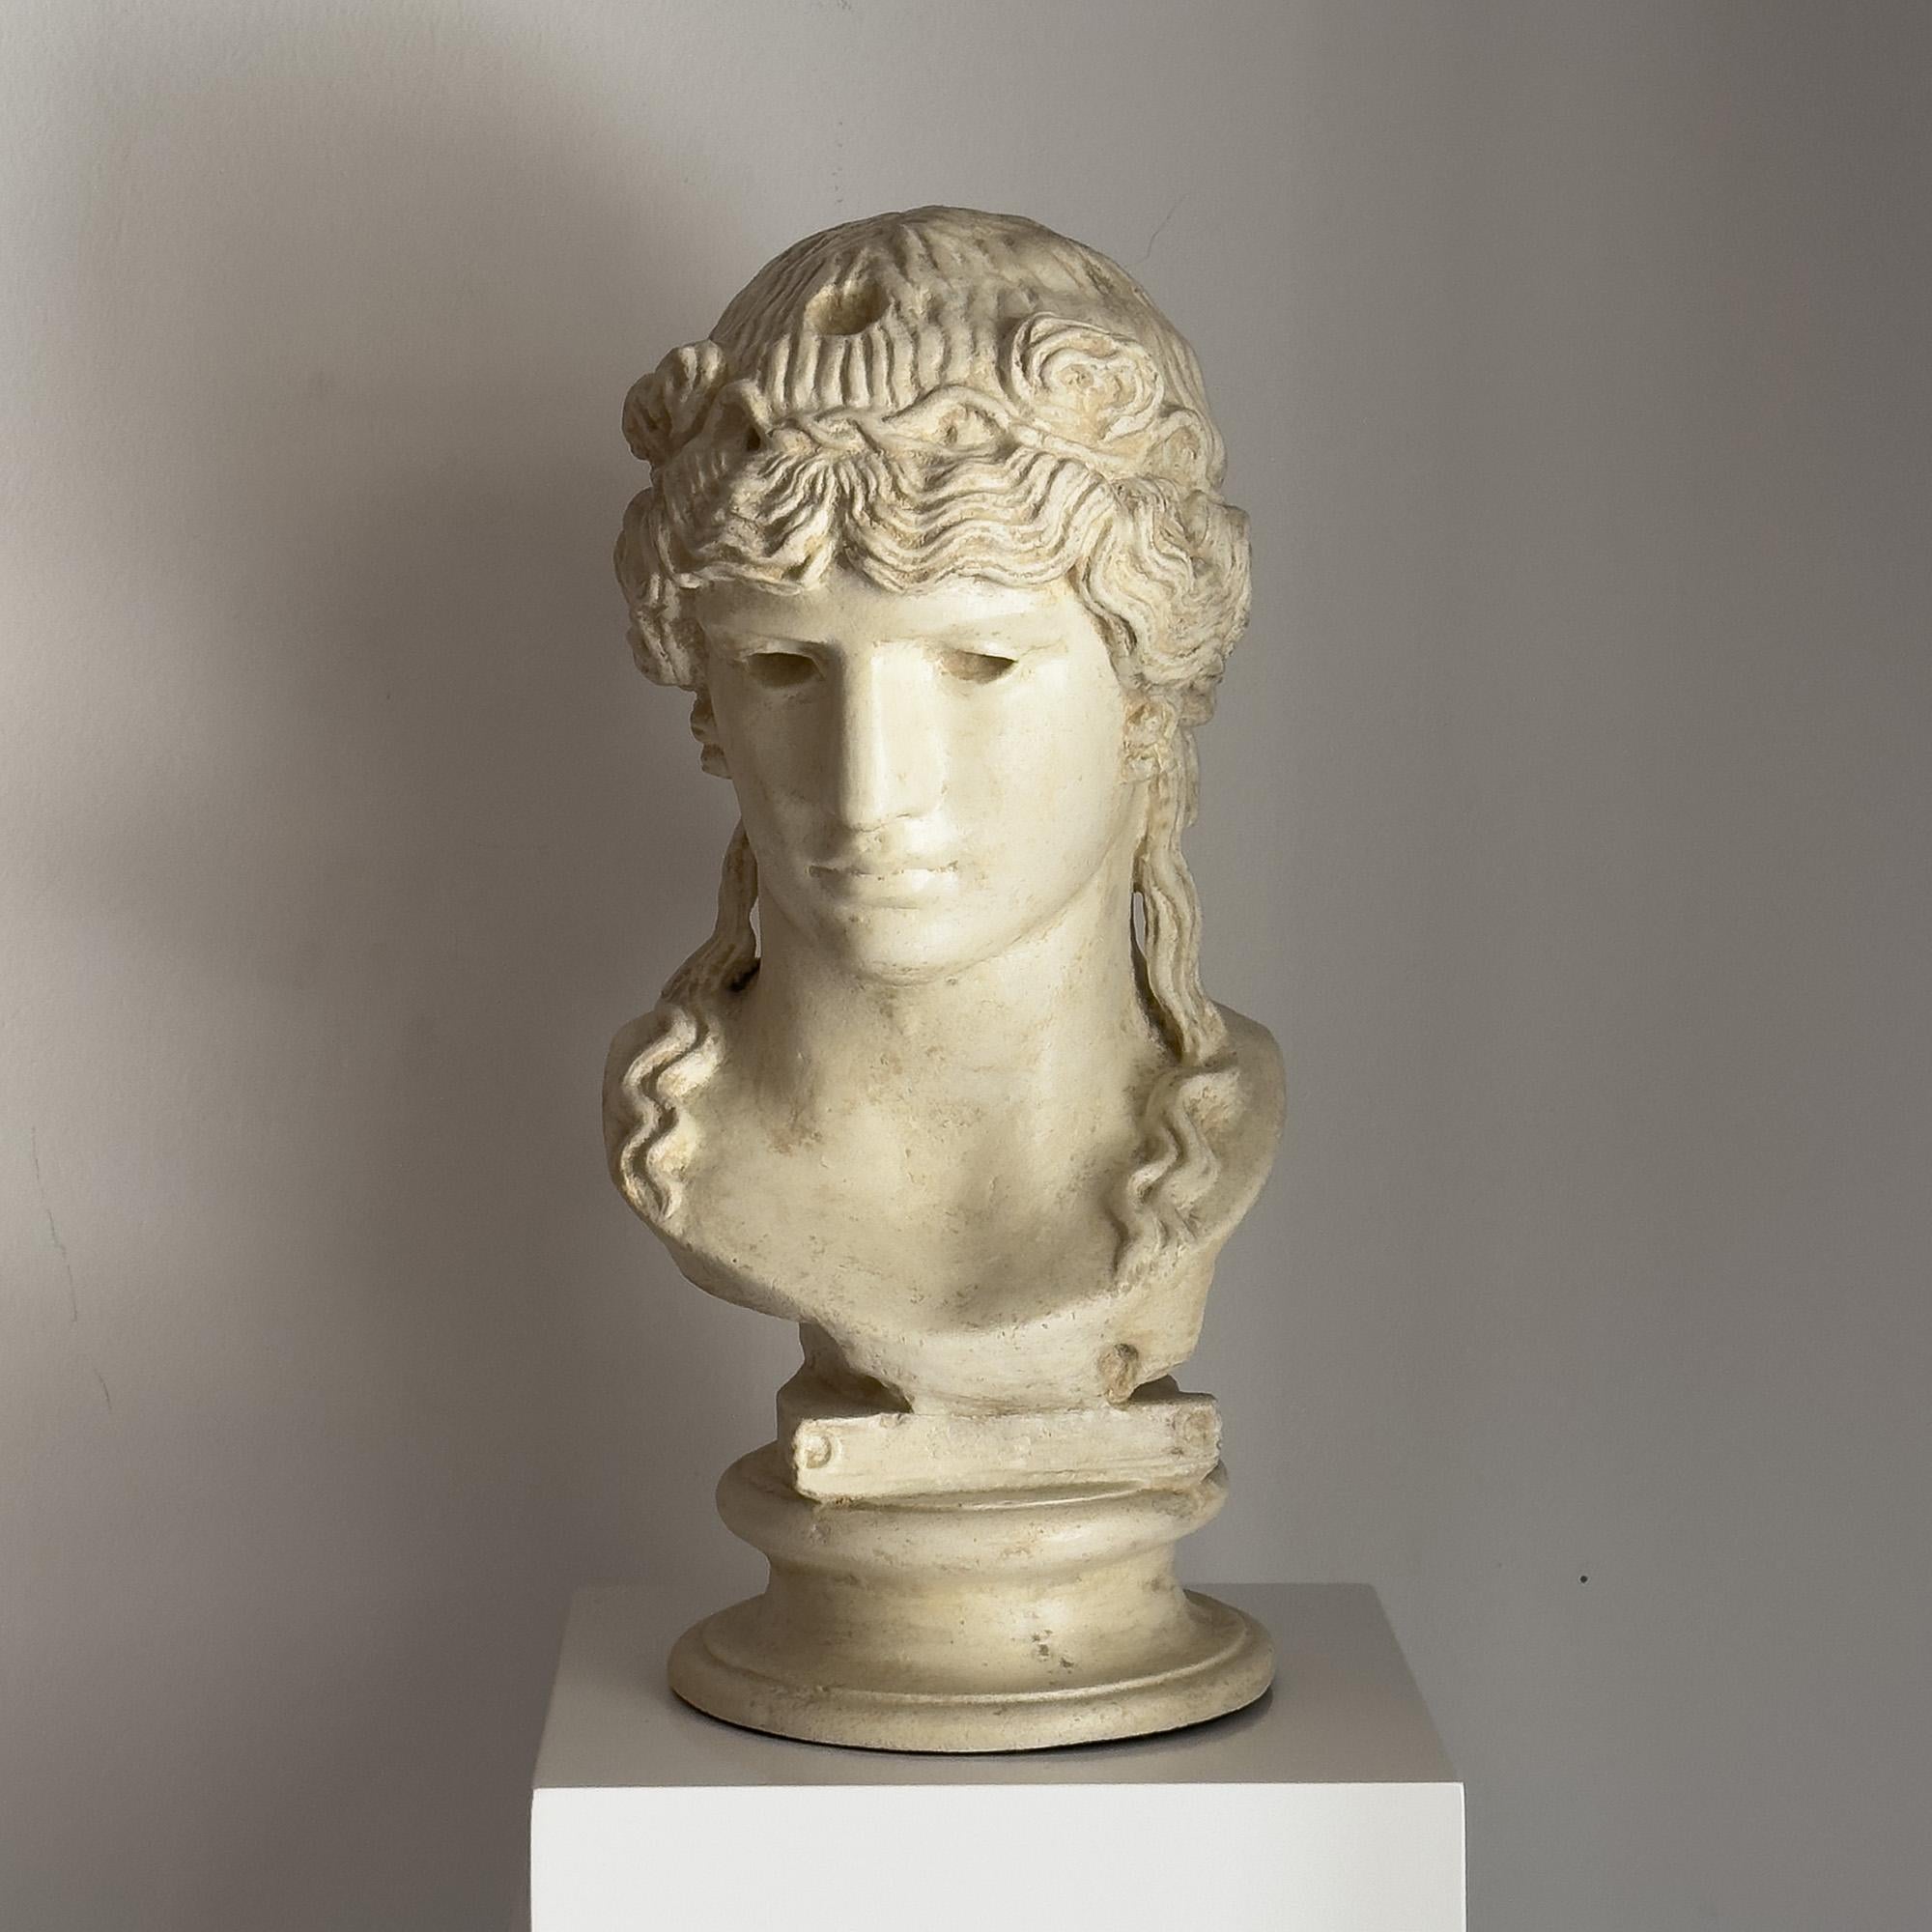 Bust of Antinoos made of moulded and carved limestone, following models of classical Rome.

It is solid stone. It is part of a series of 8 copies distributed exclusively by our gallery.